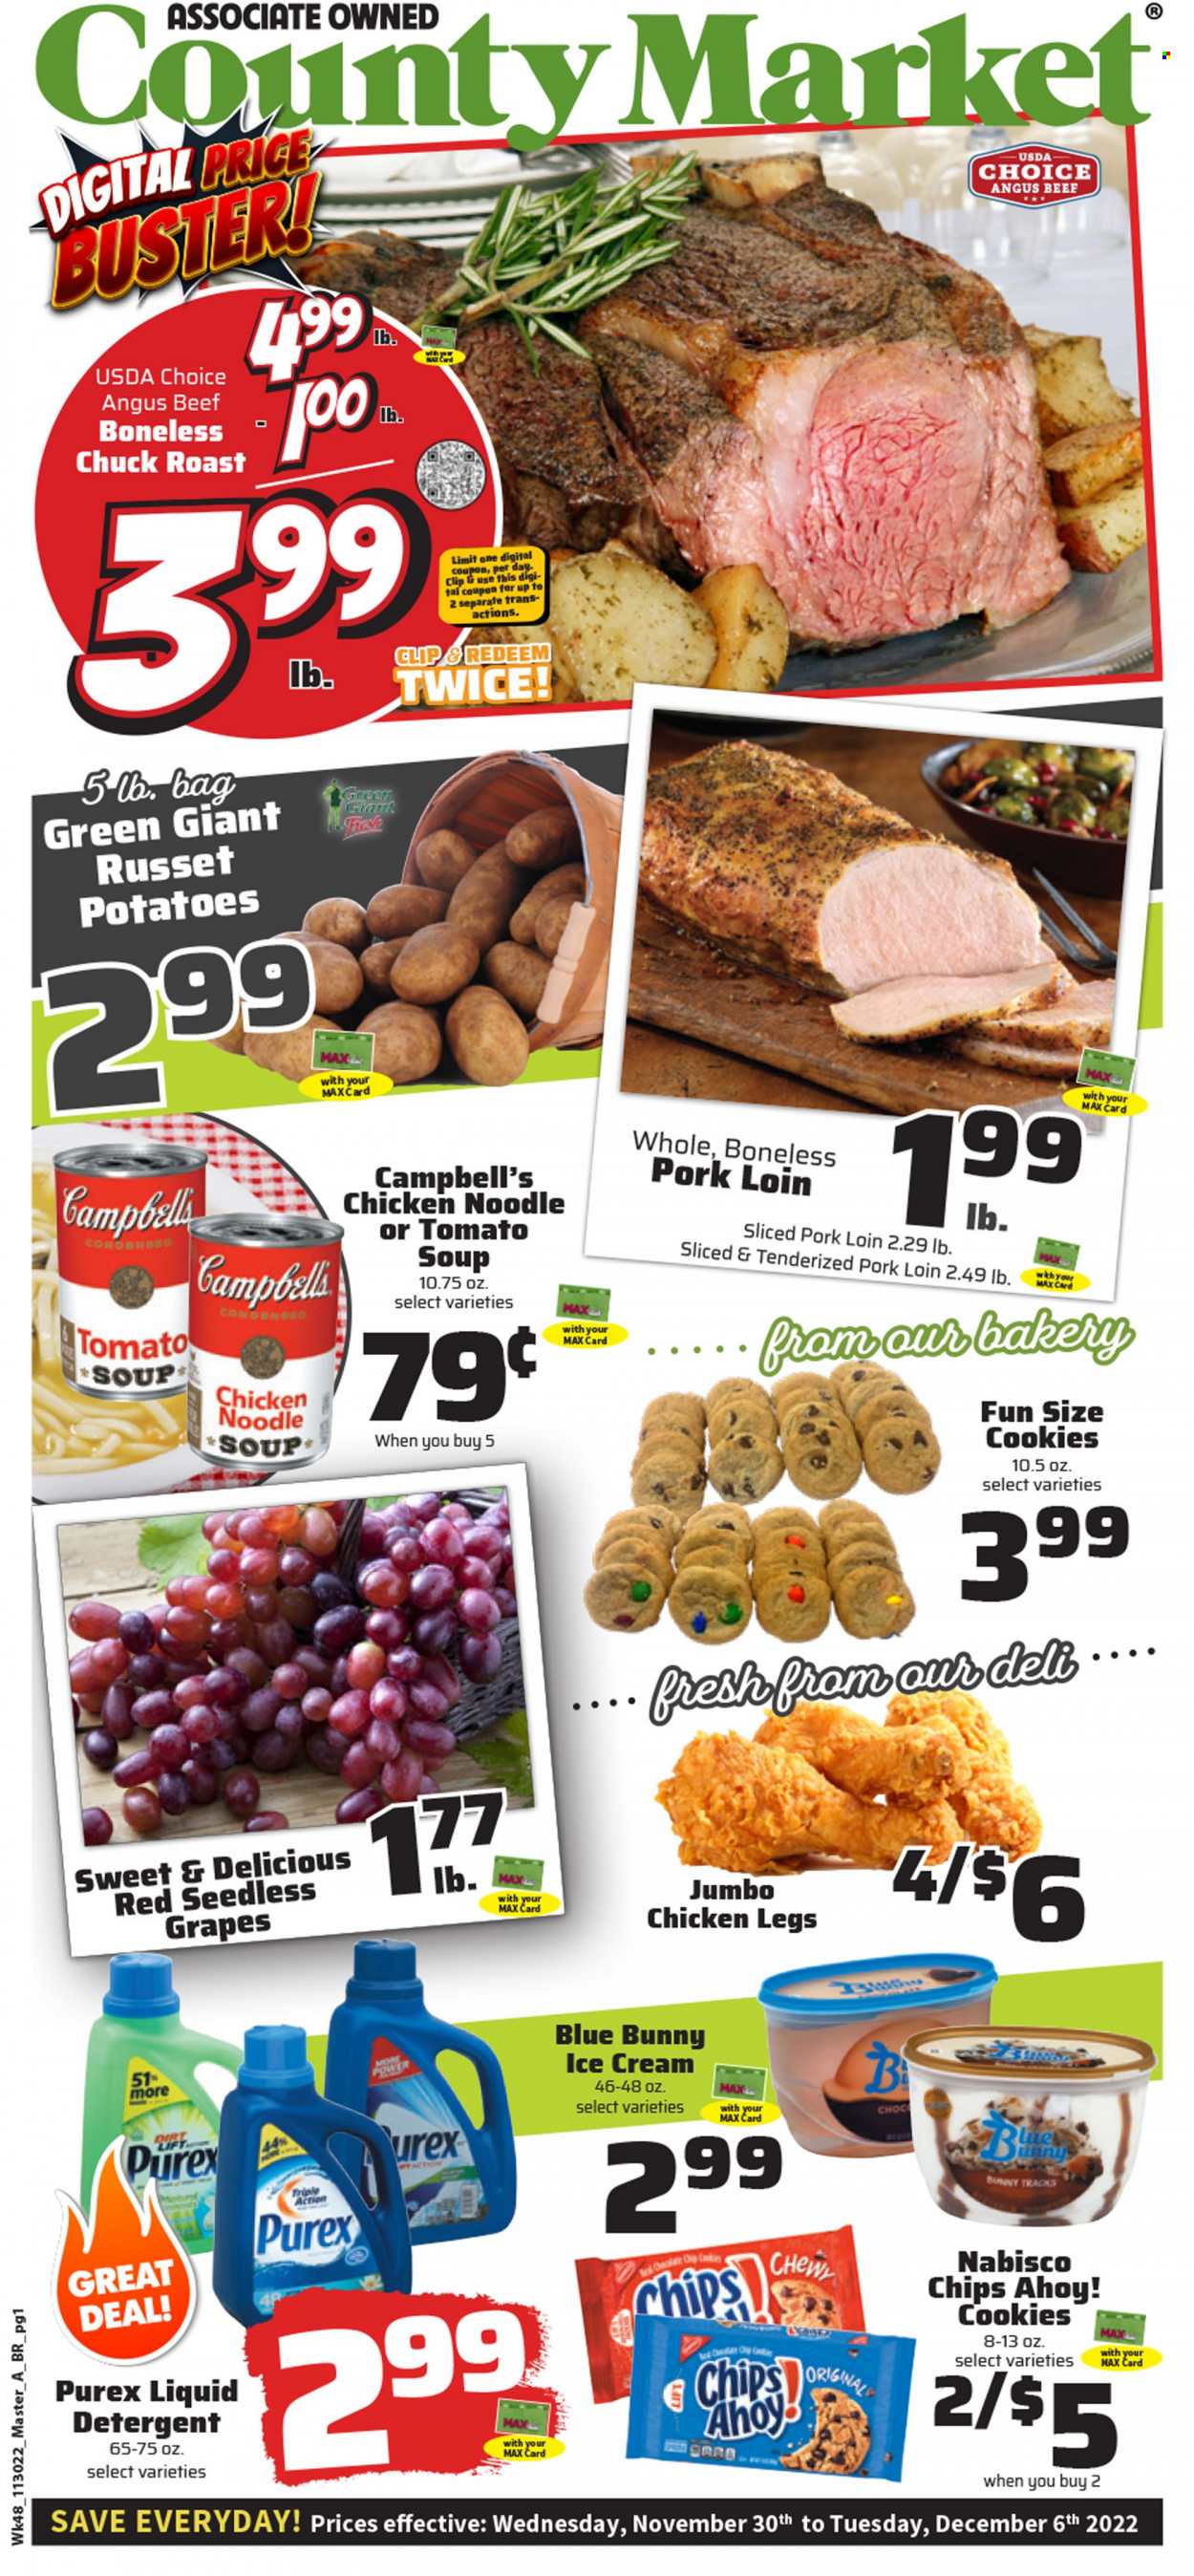 thumbnail - County Market Flyer - 11/30/2022 - 12/06/2022 - Sales products - russet potatoes, potatoes, grapes, seedless grapes, Campbell's, tomato soup, soup, noodles cup, noodles, ice cream, Blue Bunny, cookies, Chips Ahoy!, chips, chicken legs, beef meat, chuck roast, pork loin, pork meat. Page 1.